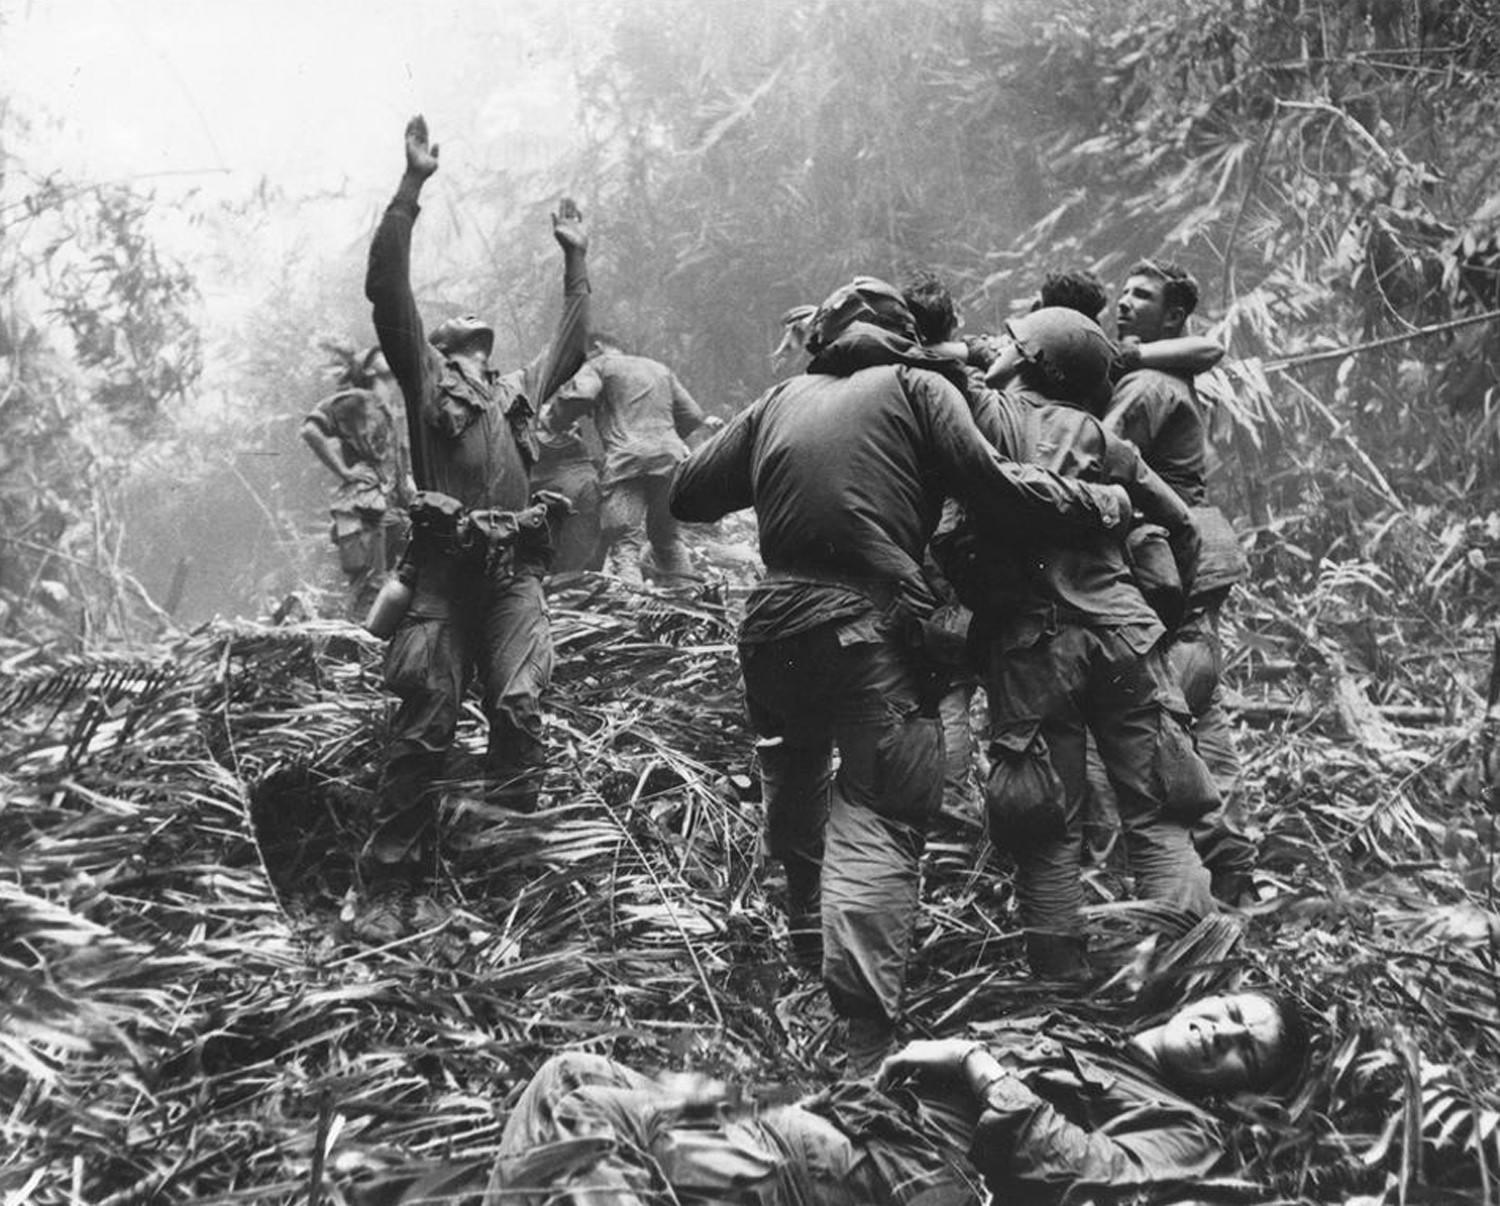 101st Airborne paratroopers signaling a helicopter to evacuate their wounded, 1968